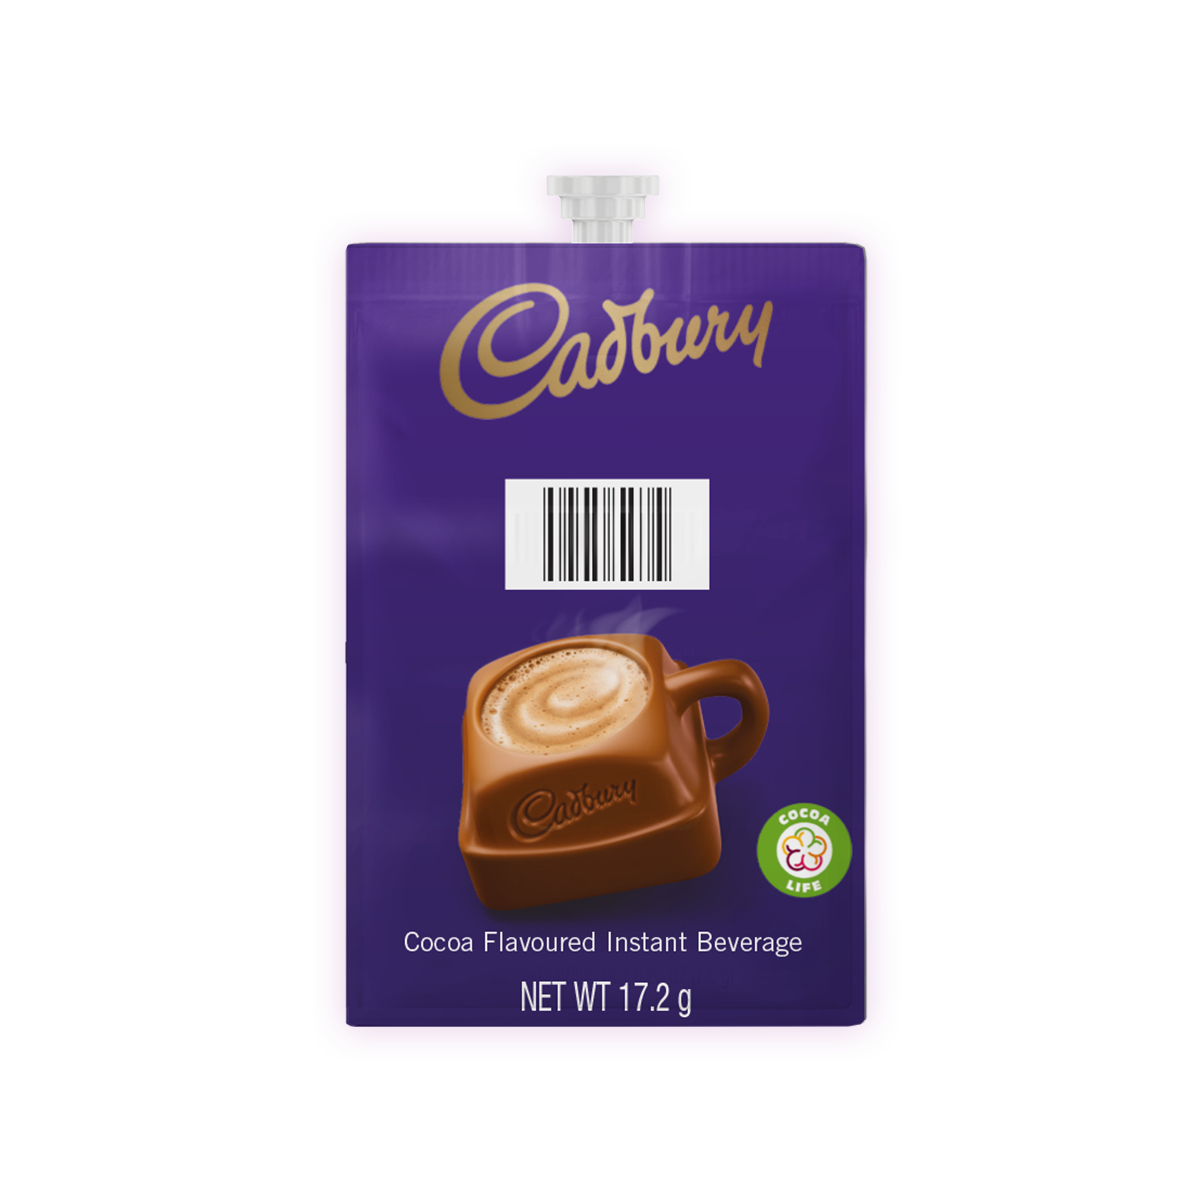 https://s39409.pcdn.co/wp-content/uploads/2021/09/1200X1200-Flavia-drink_0011_Cadbury.png